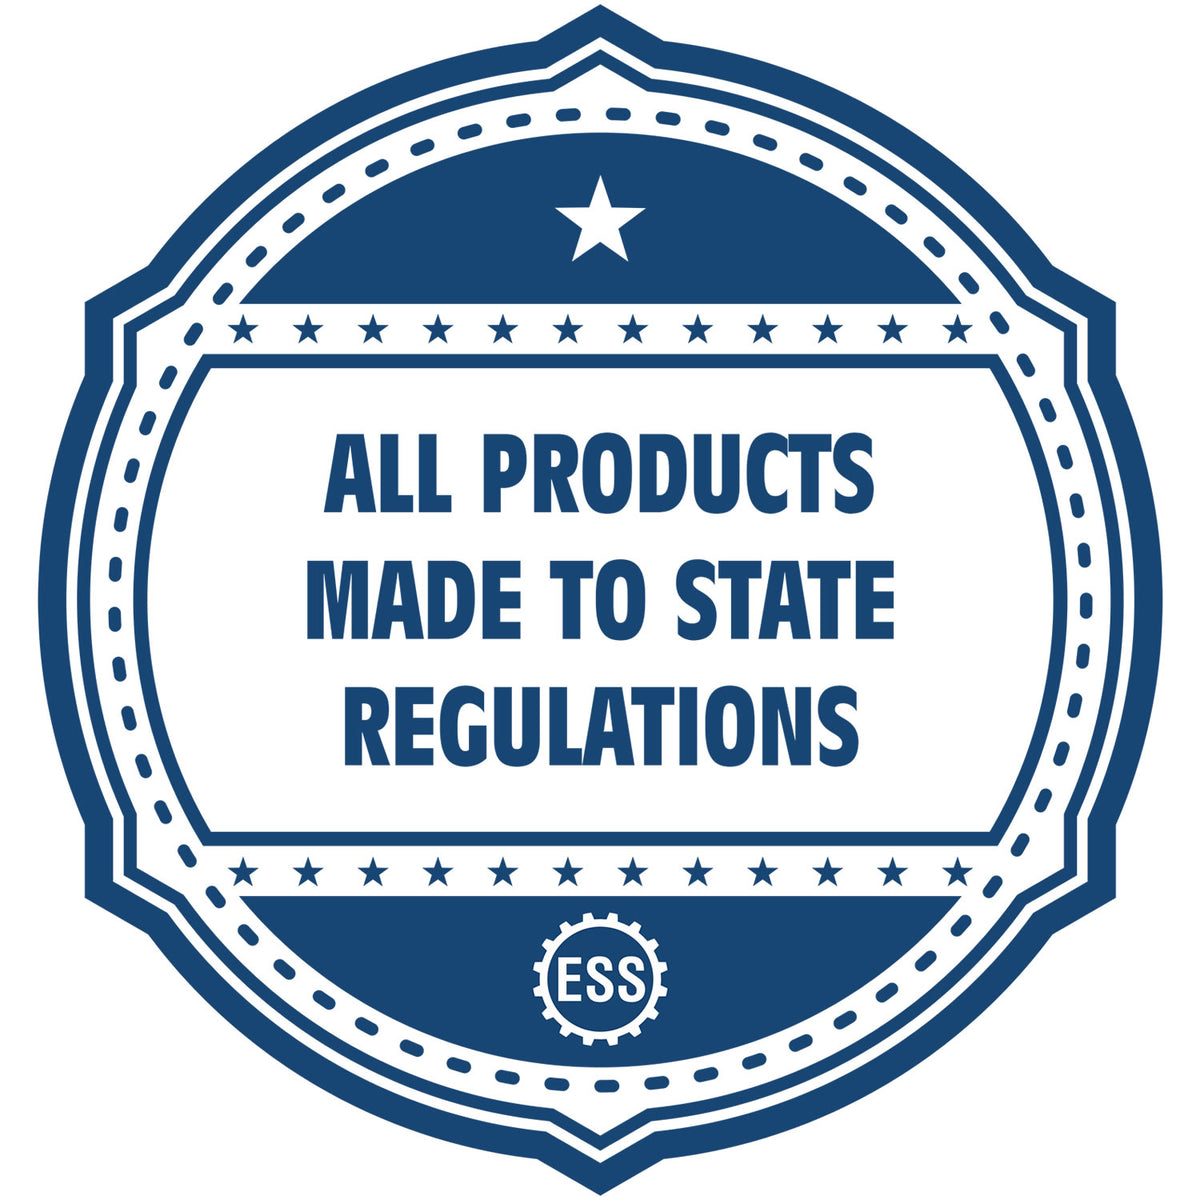 An icon or badge element for the PSI Massachusetts Notary Stamp showing that this product is made in compliance with state regulations.